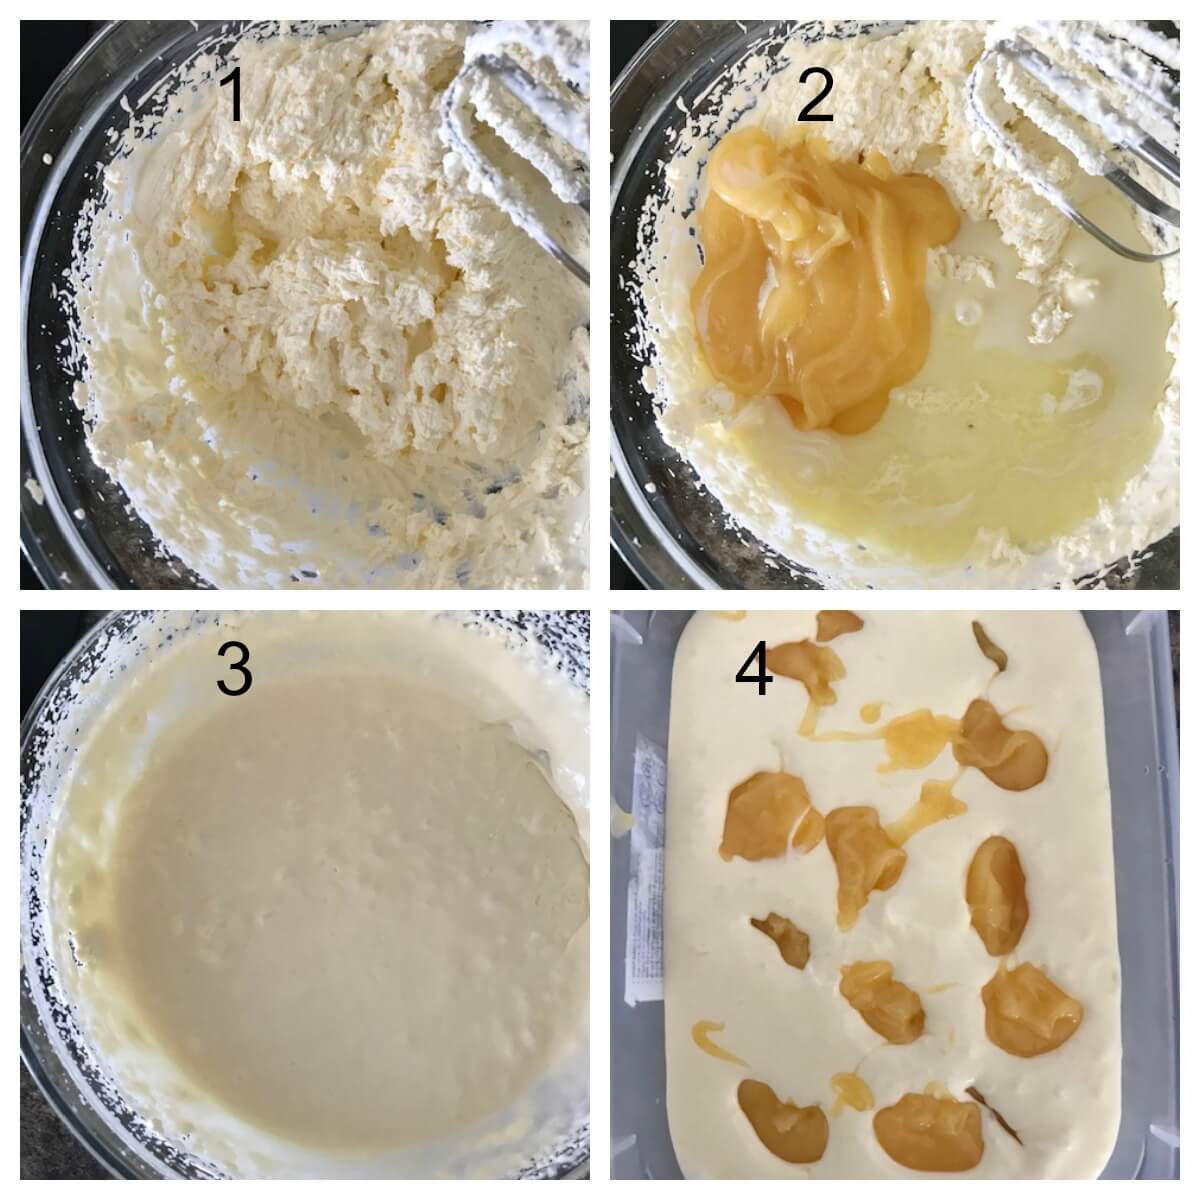 Collage of 4 photos to show how to make lemon curd ice cream with limoncello.